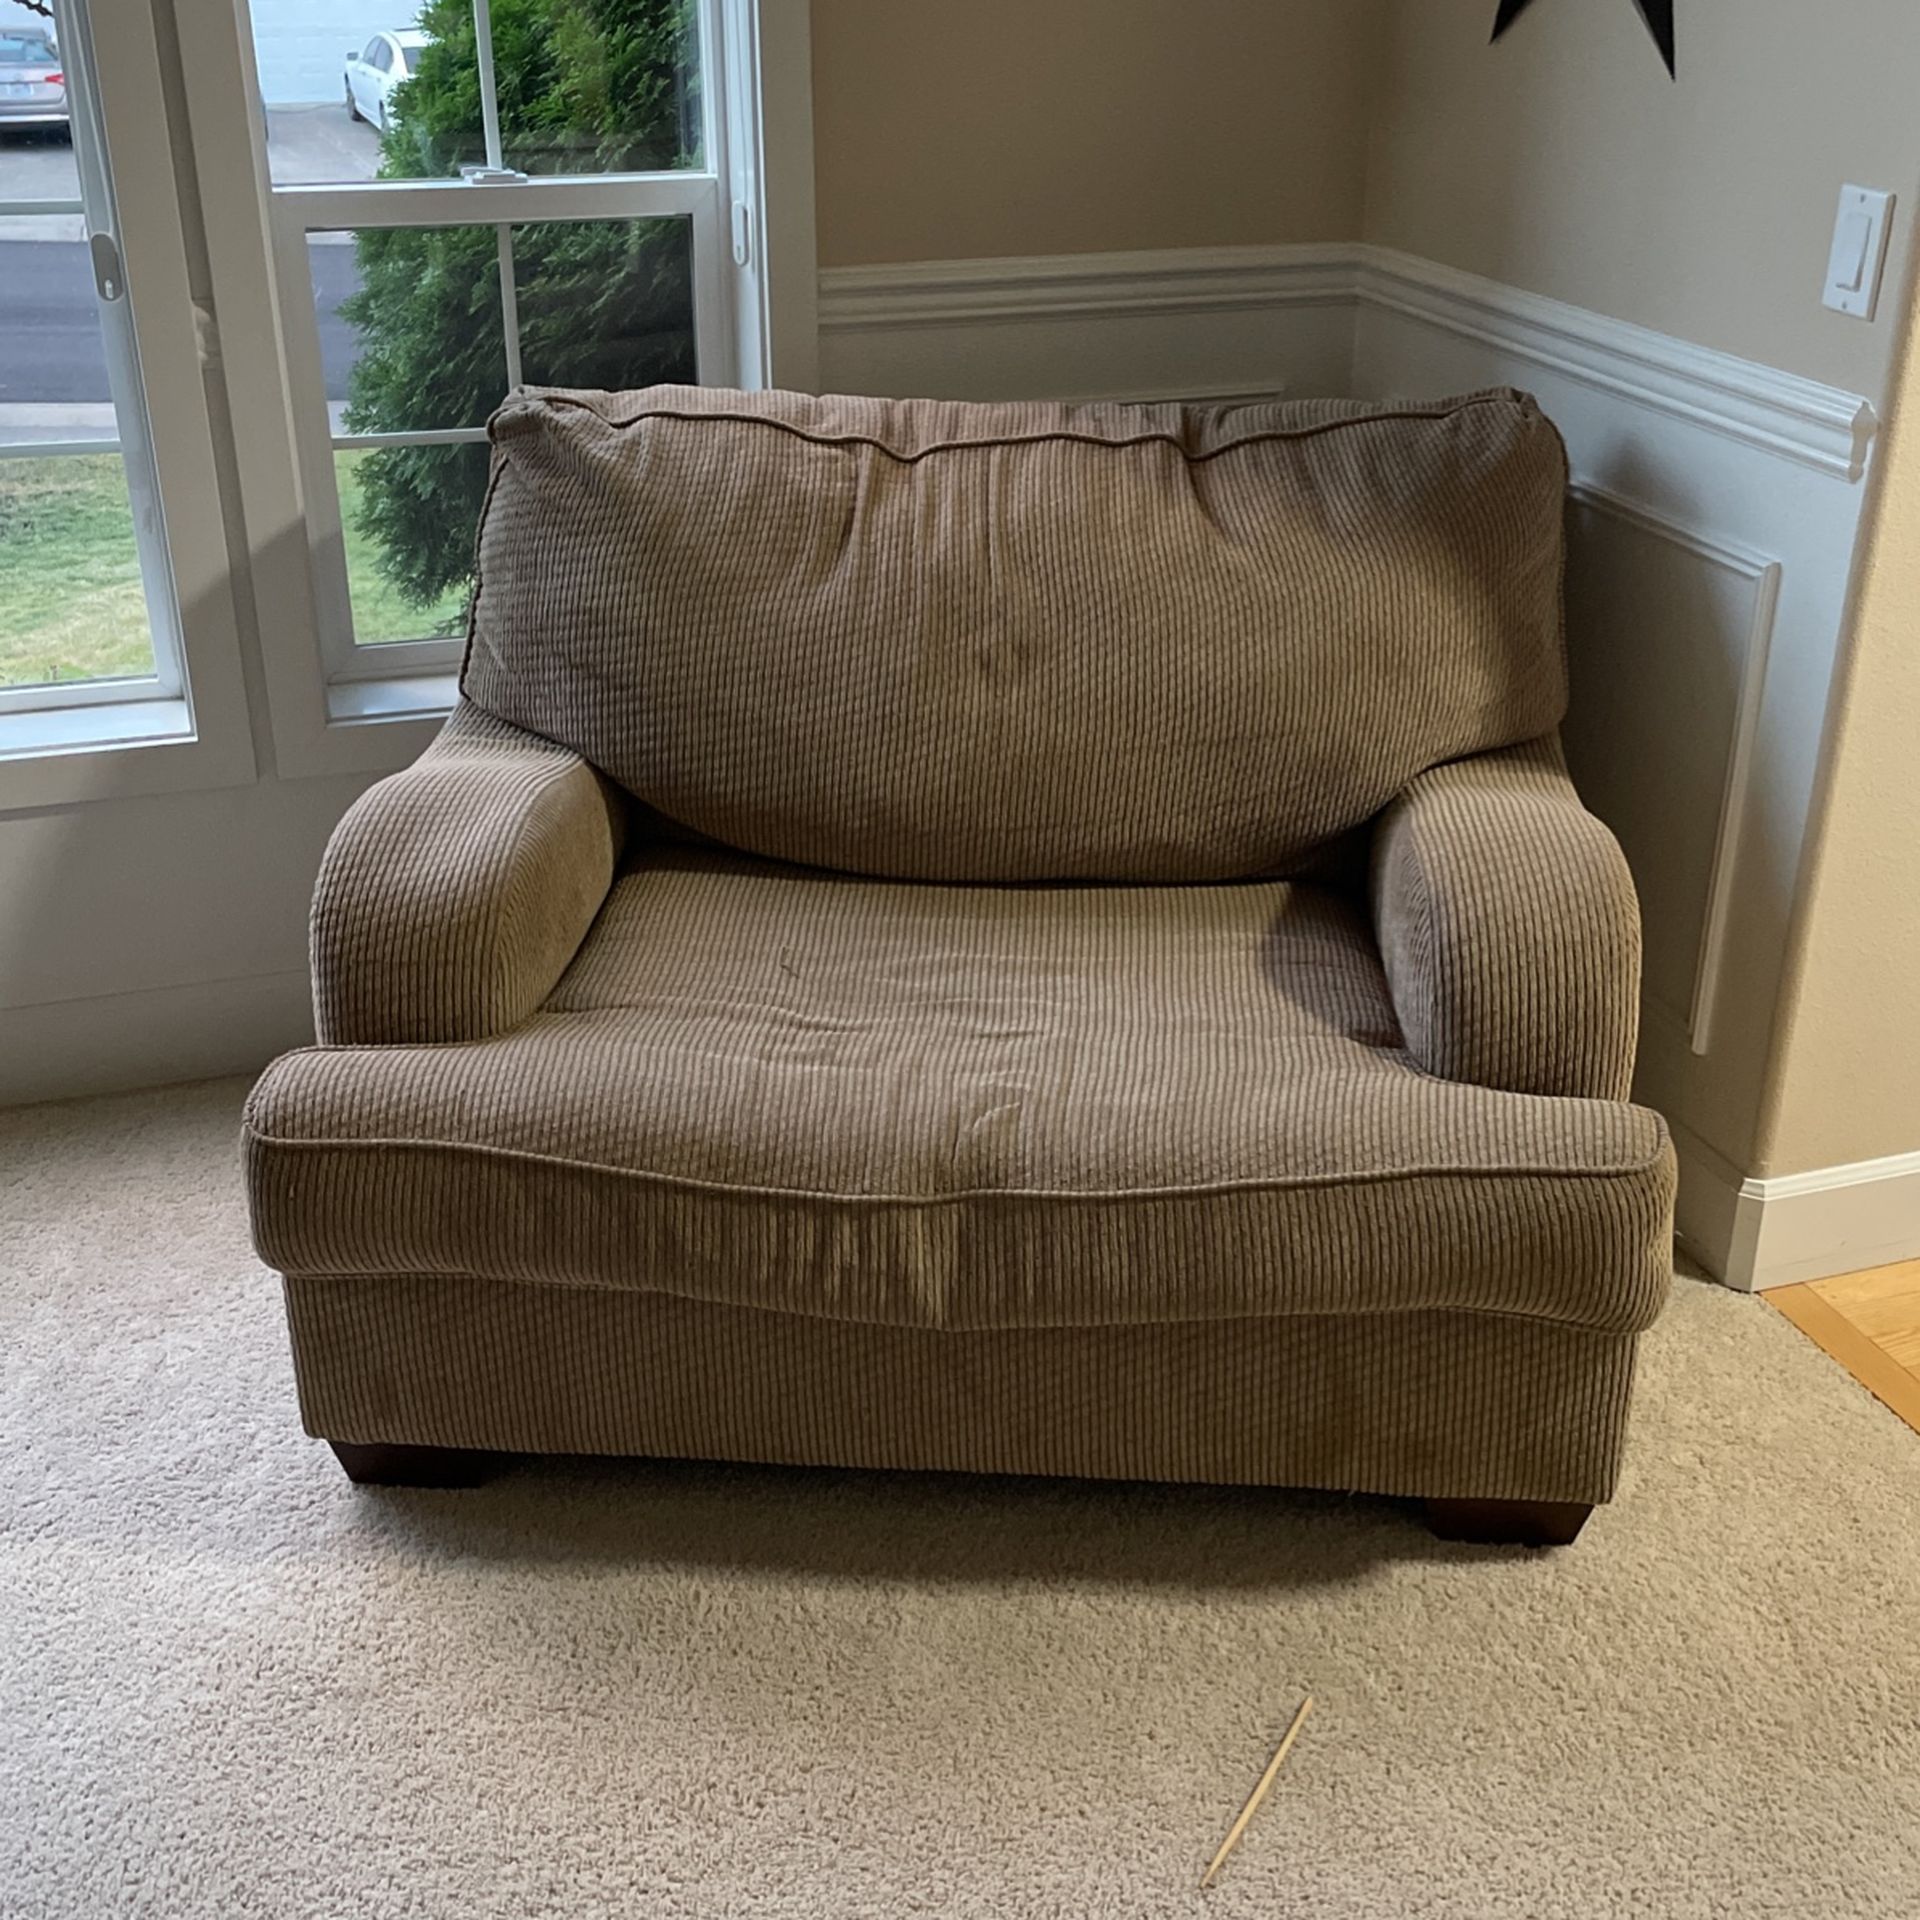 Super Comfy Oversized Sofa Chair  Free